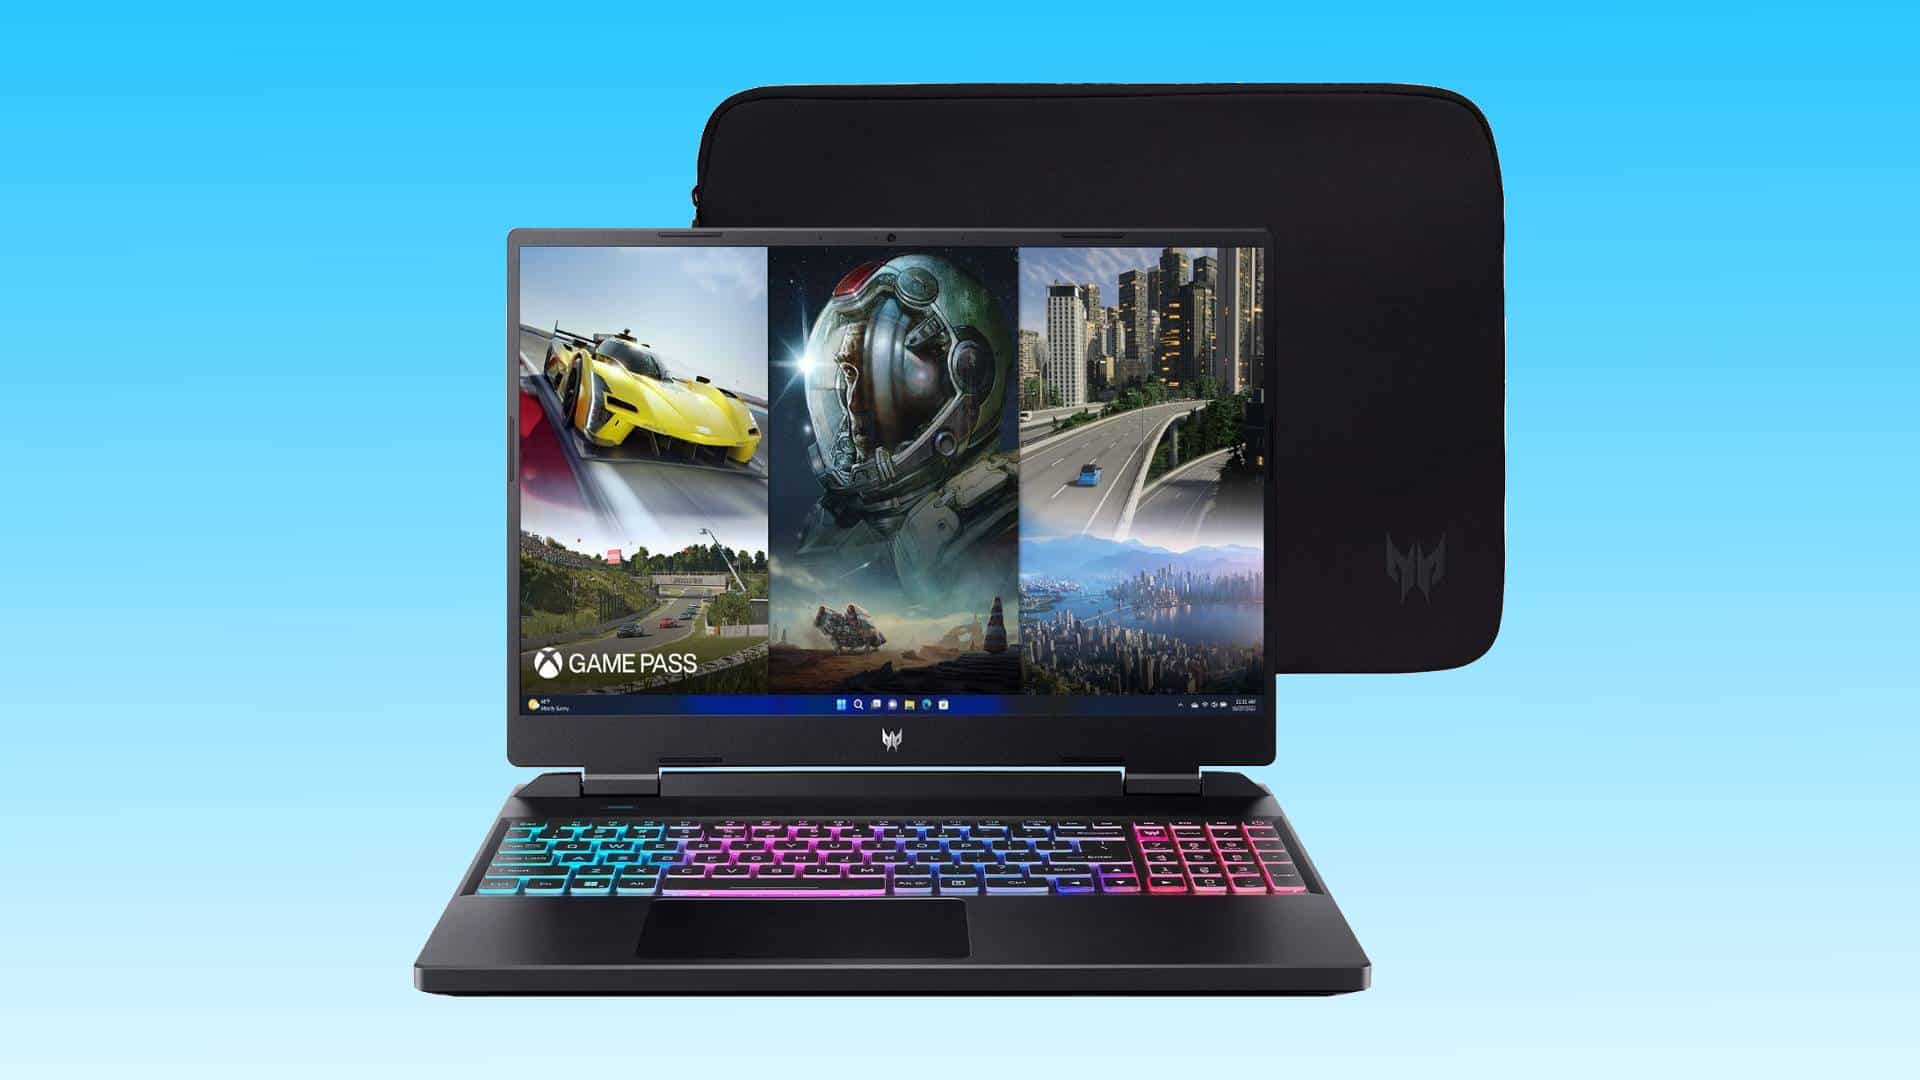 A gaming laptop from Best Buy displaying multiple video game images on its screen, featuring a colorful keyboard, against a blue background.